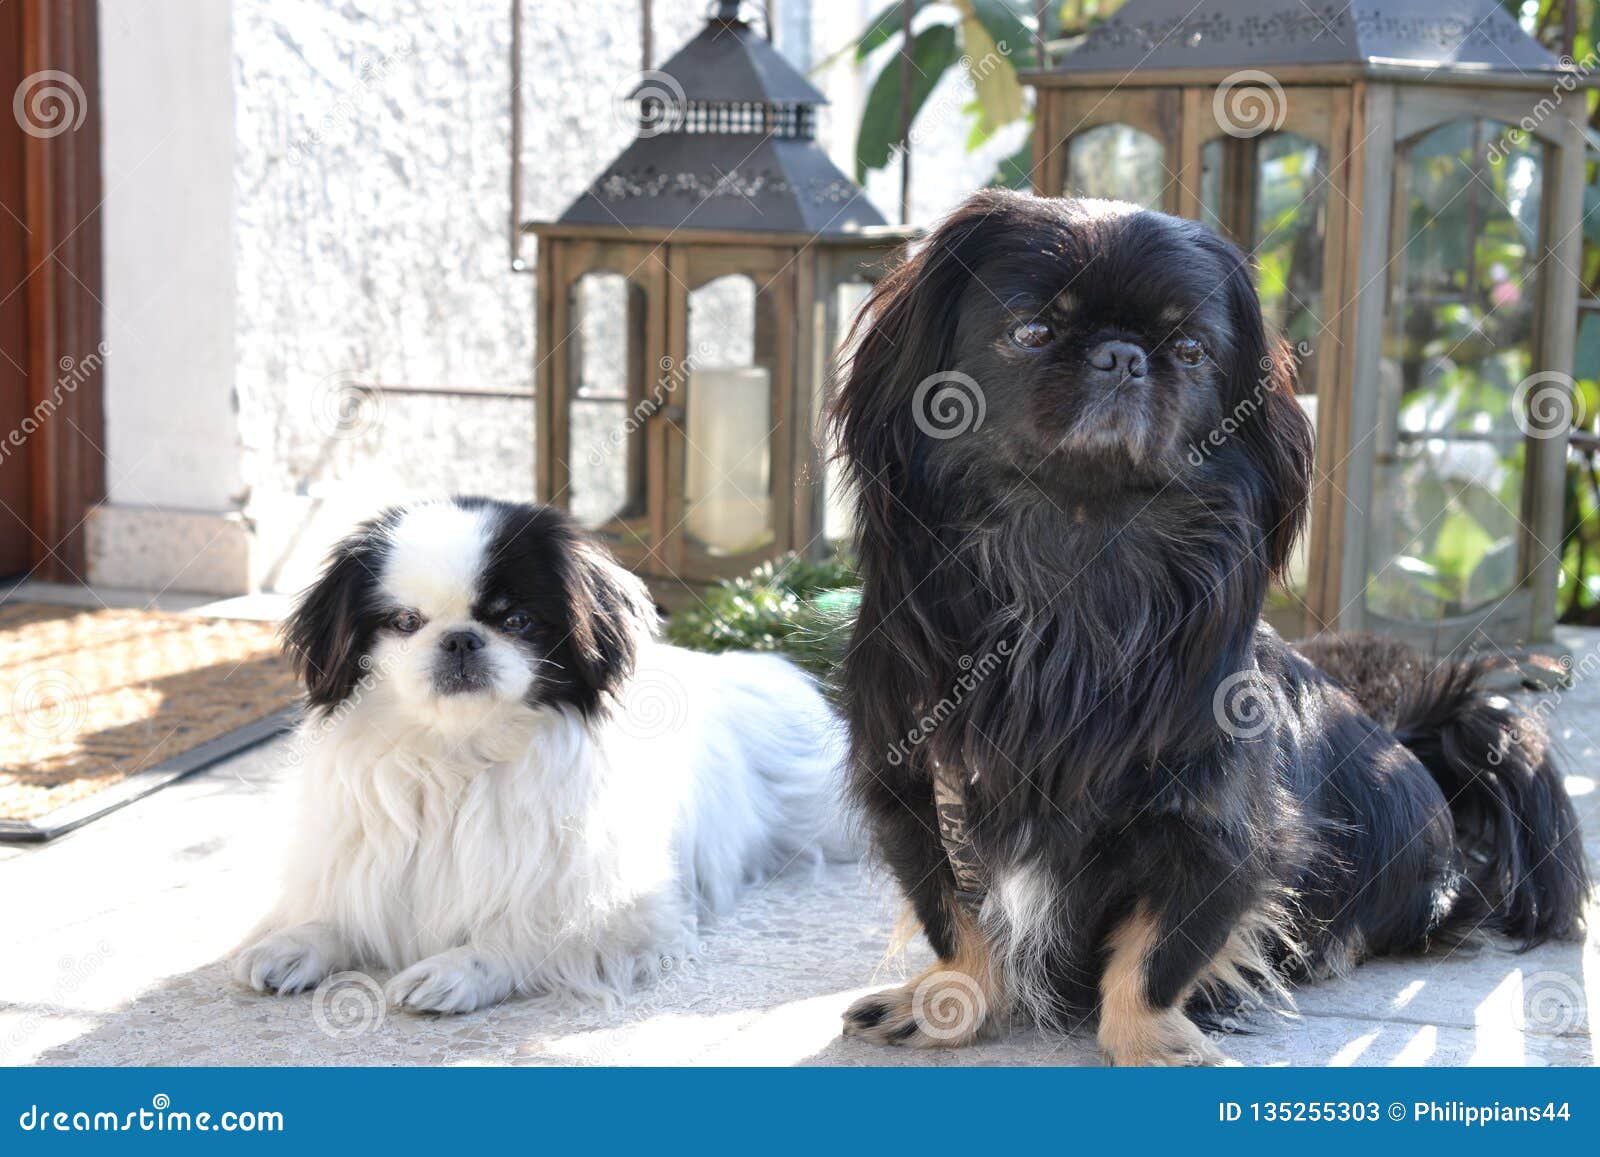 Adorable Pekinese Couple White And Black Short And Long Hair